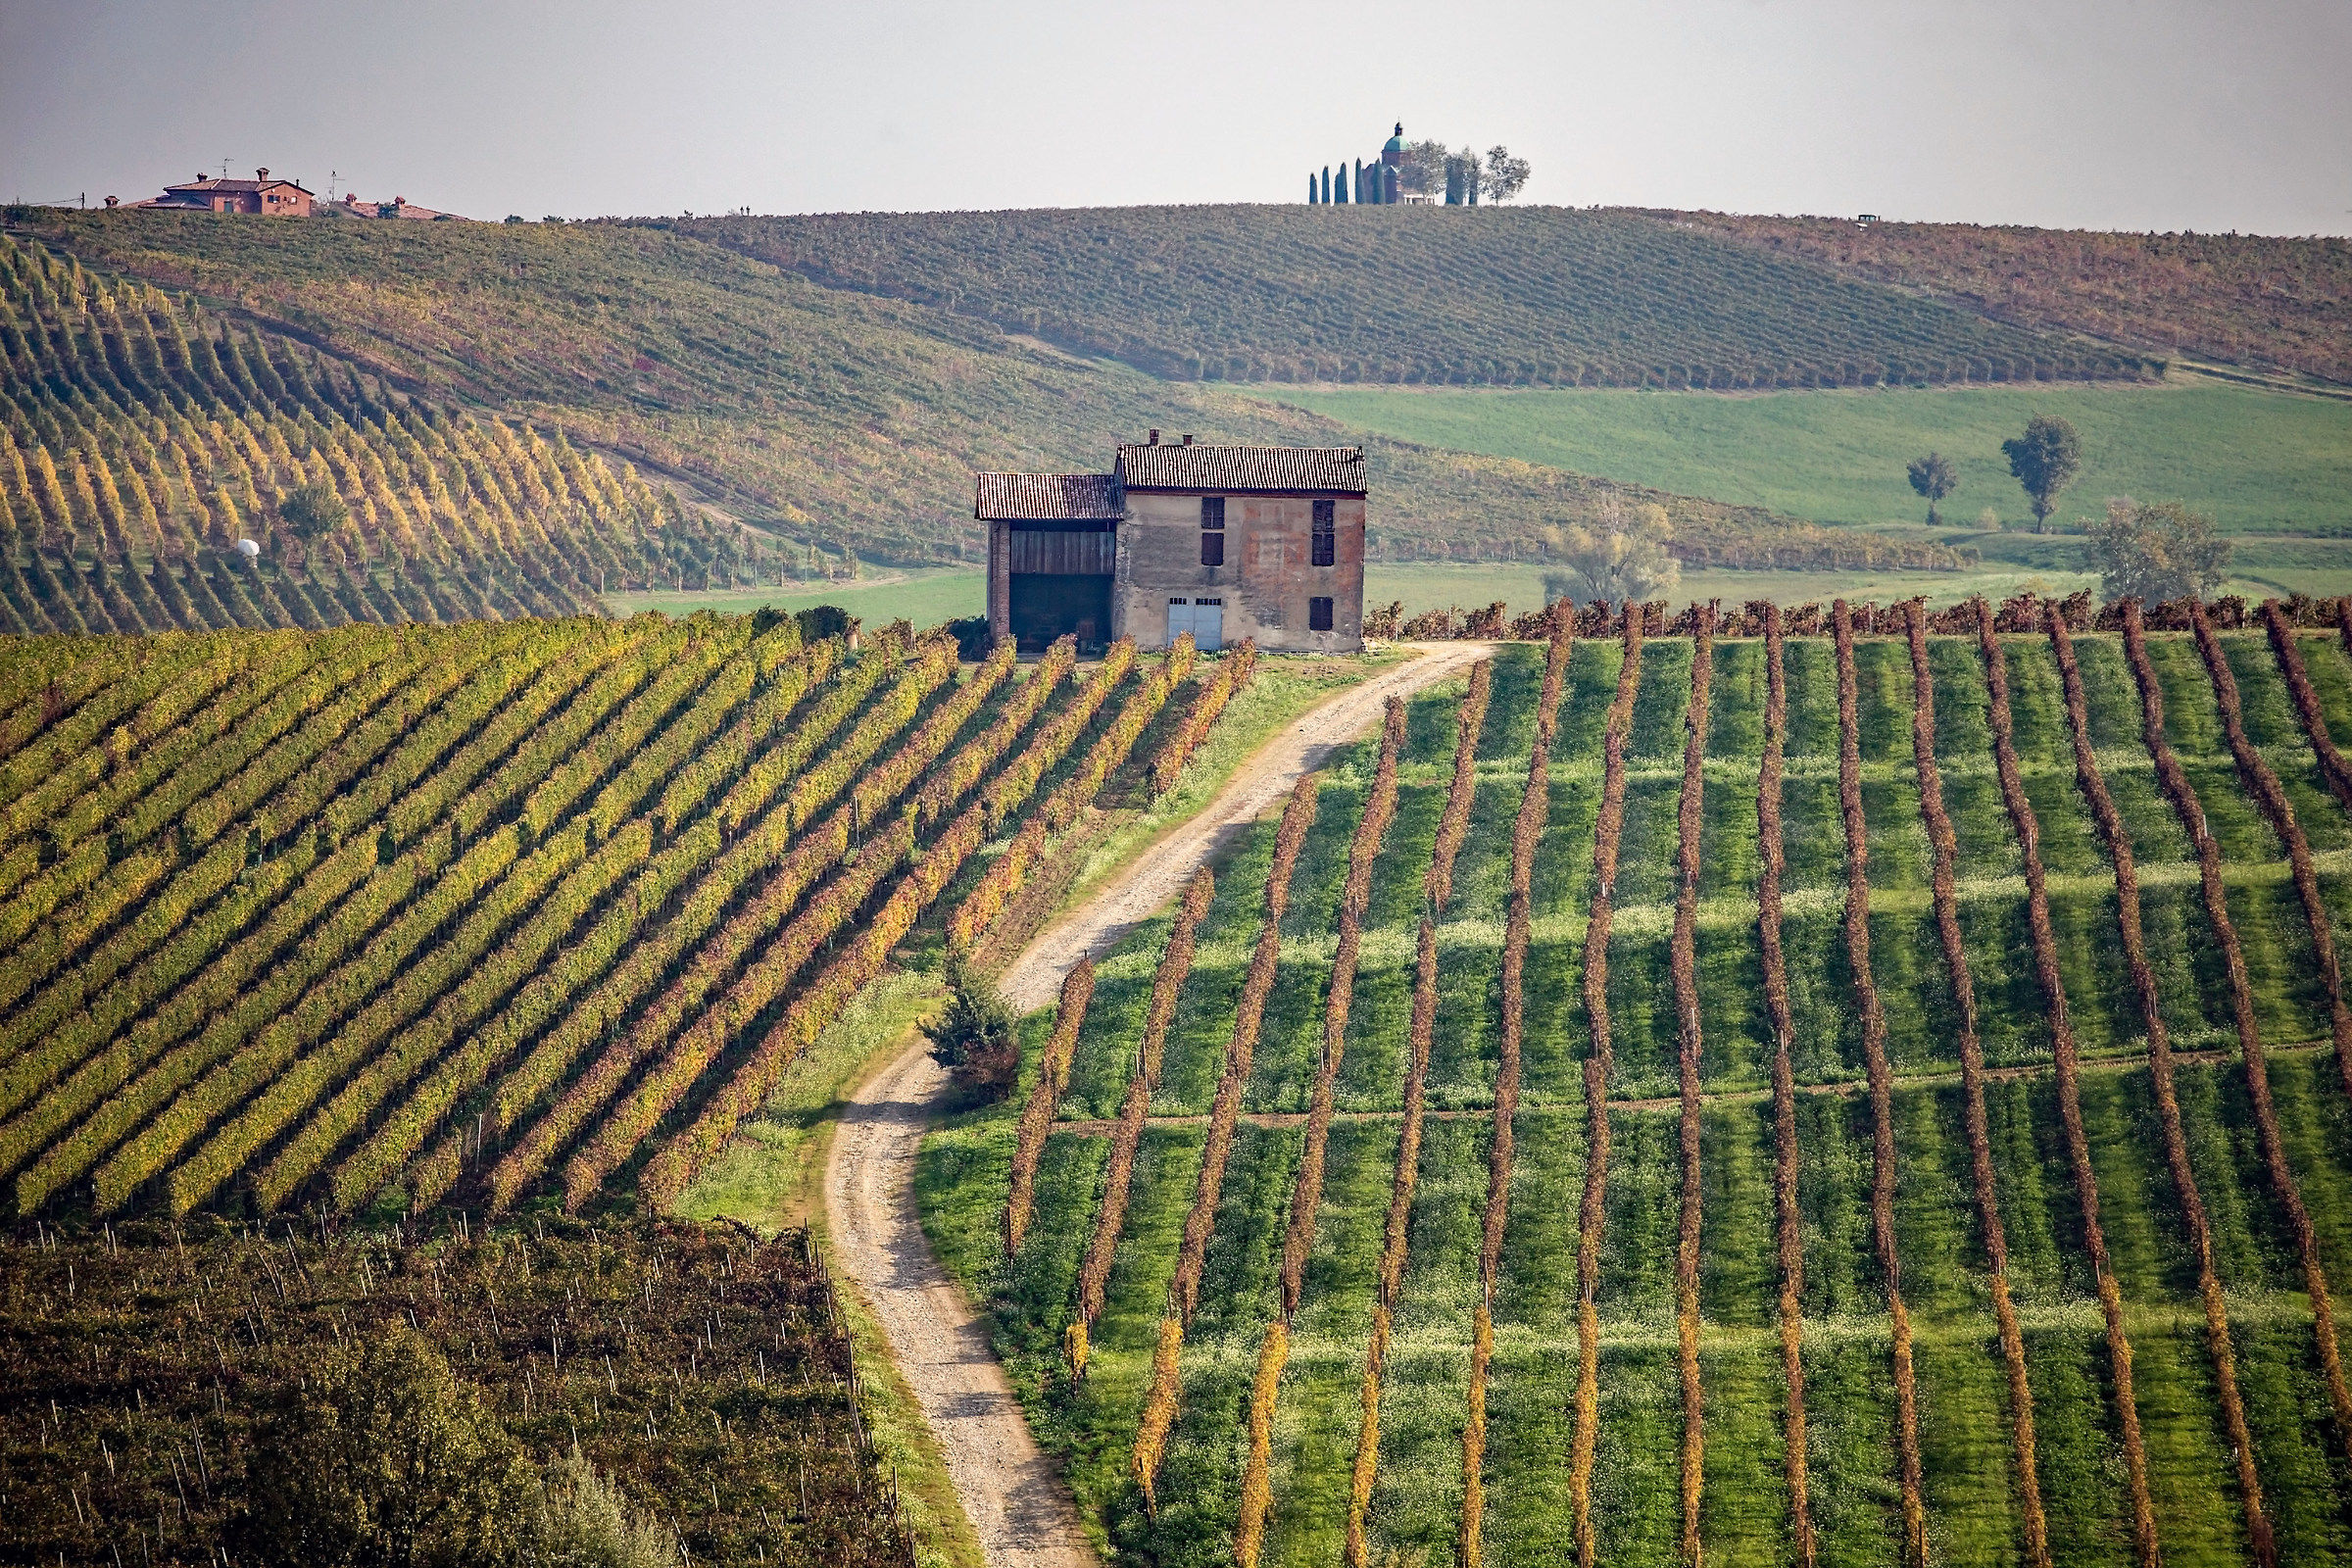 The house among the vineyards...